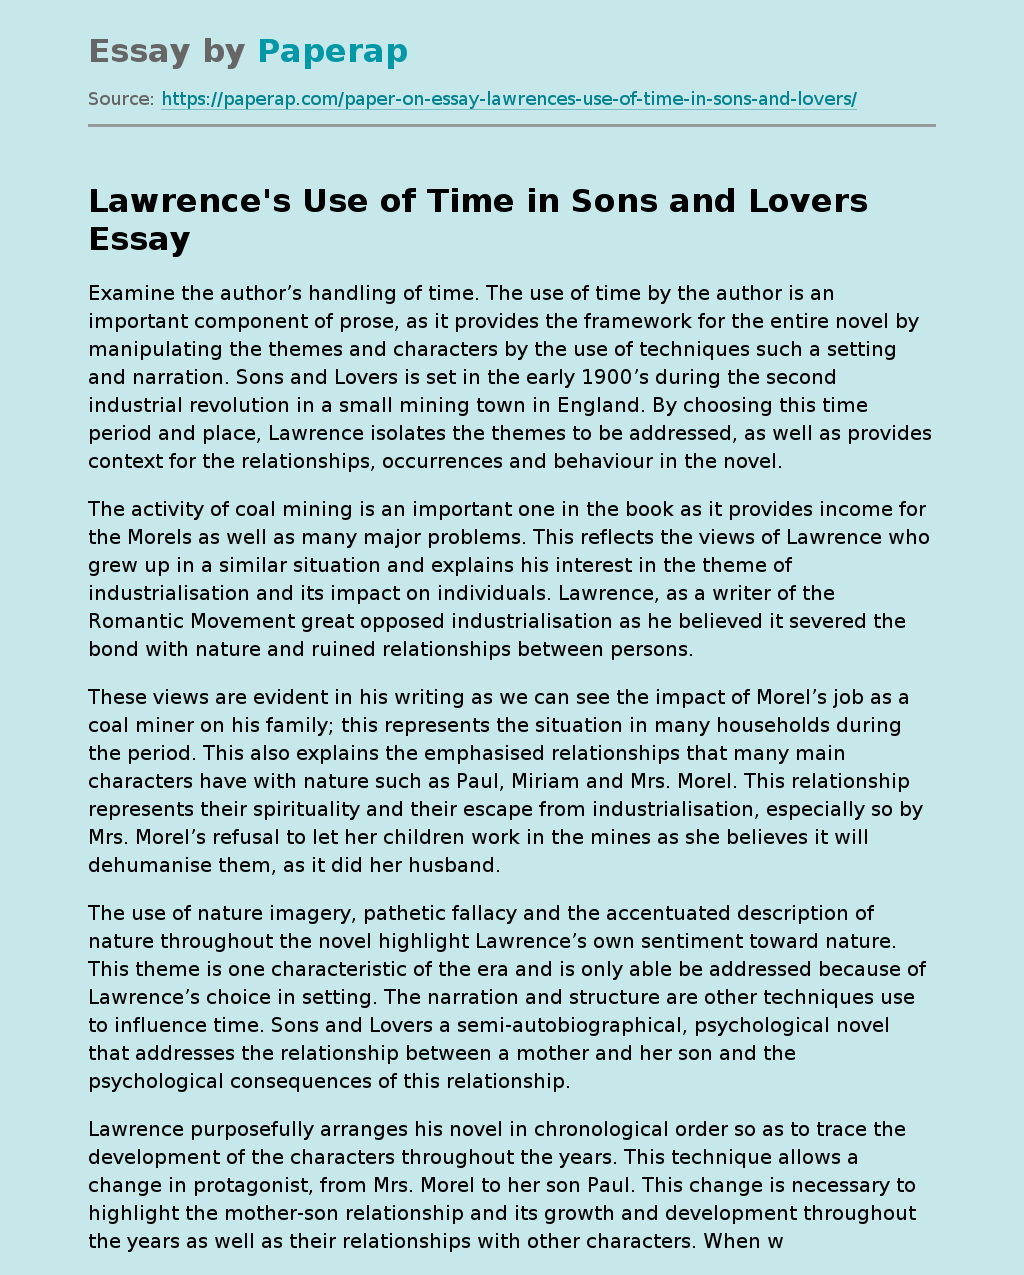 Lawrence's Use of Time in Sons and Lovers